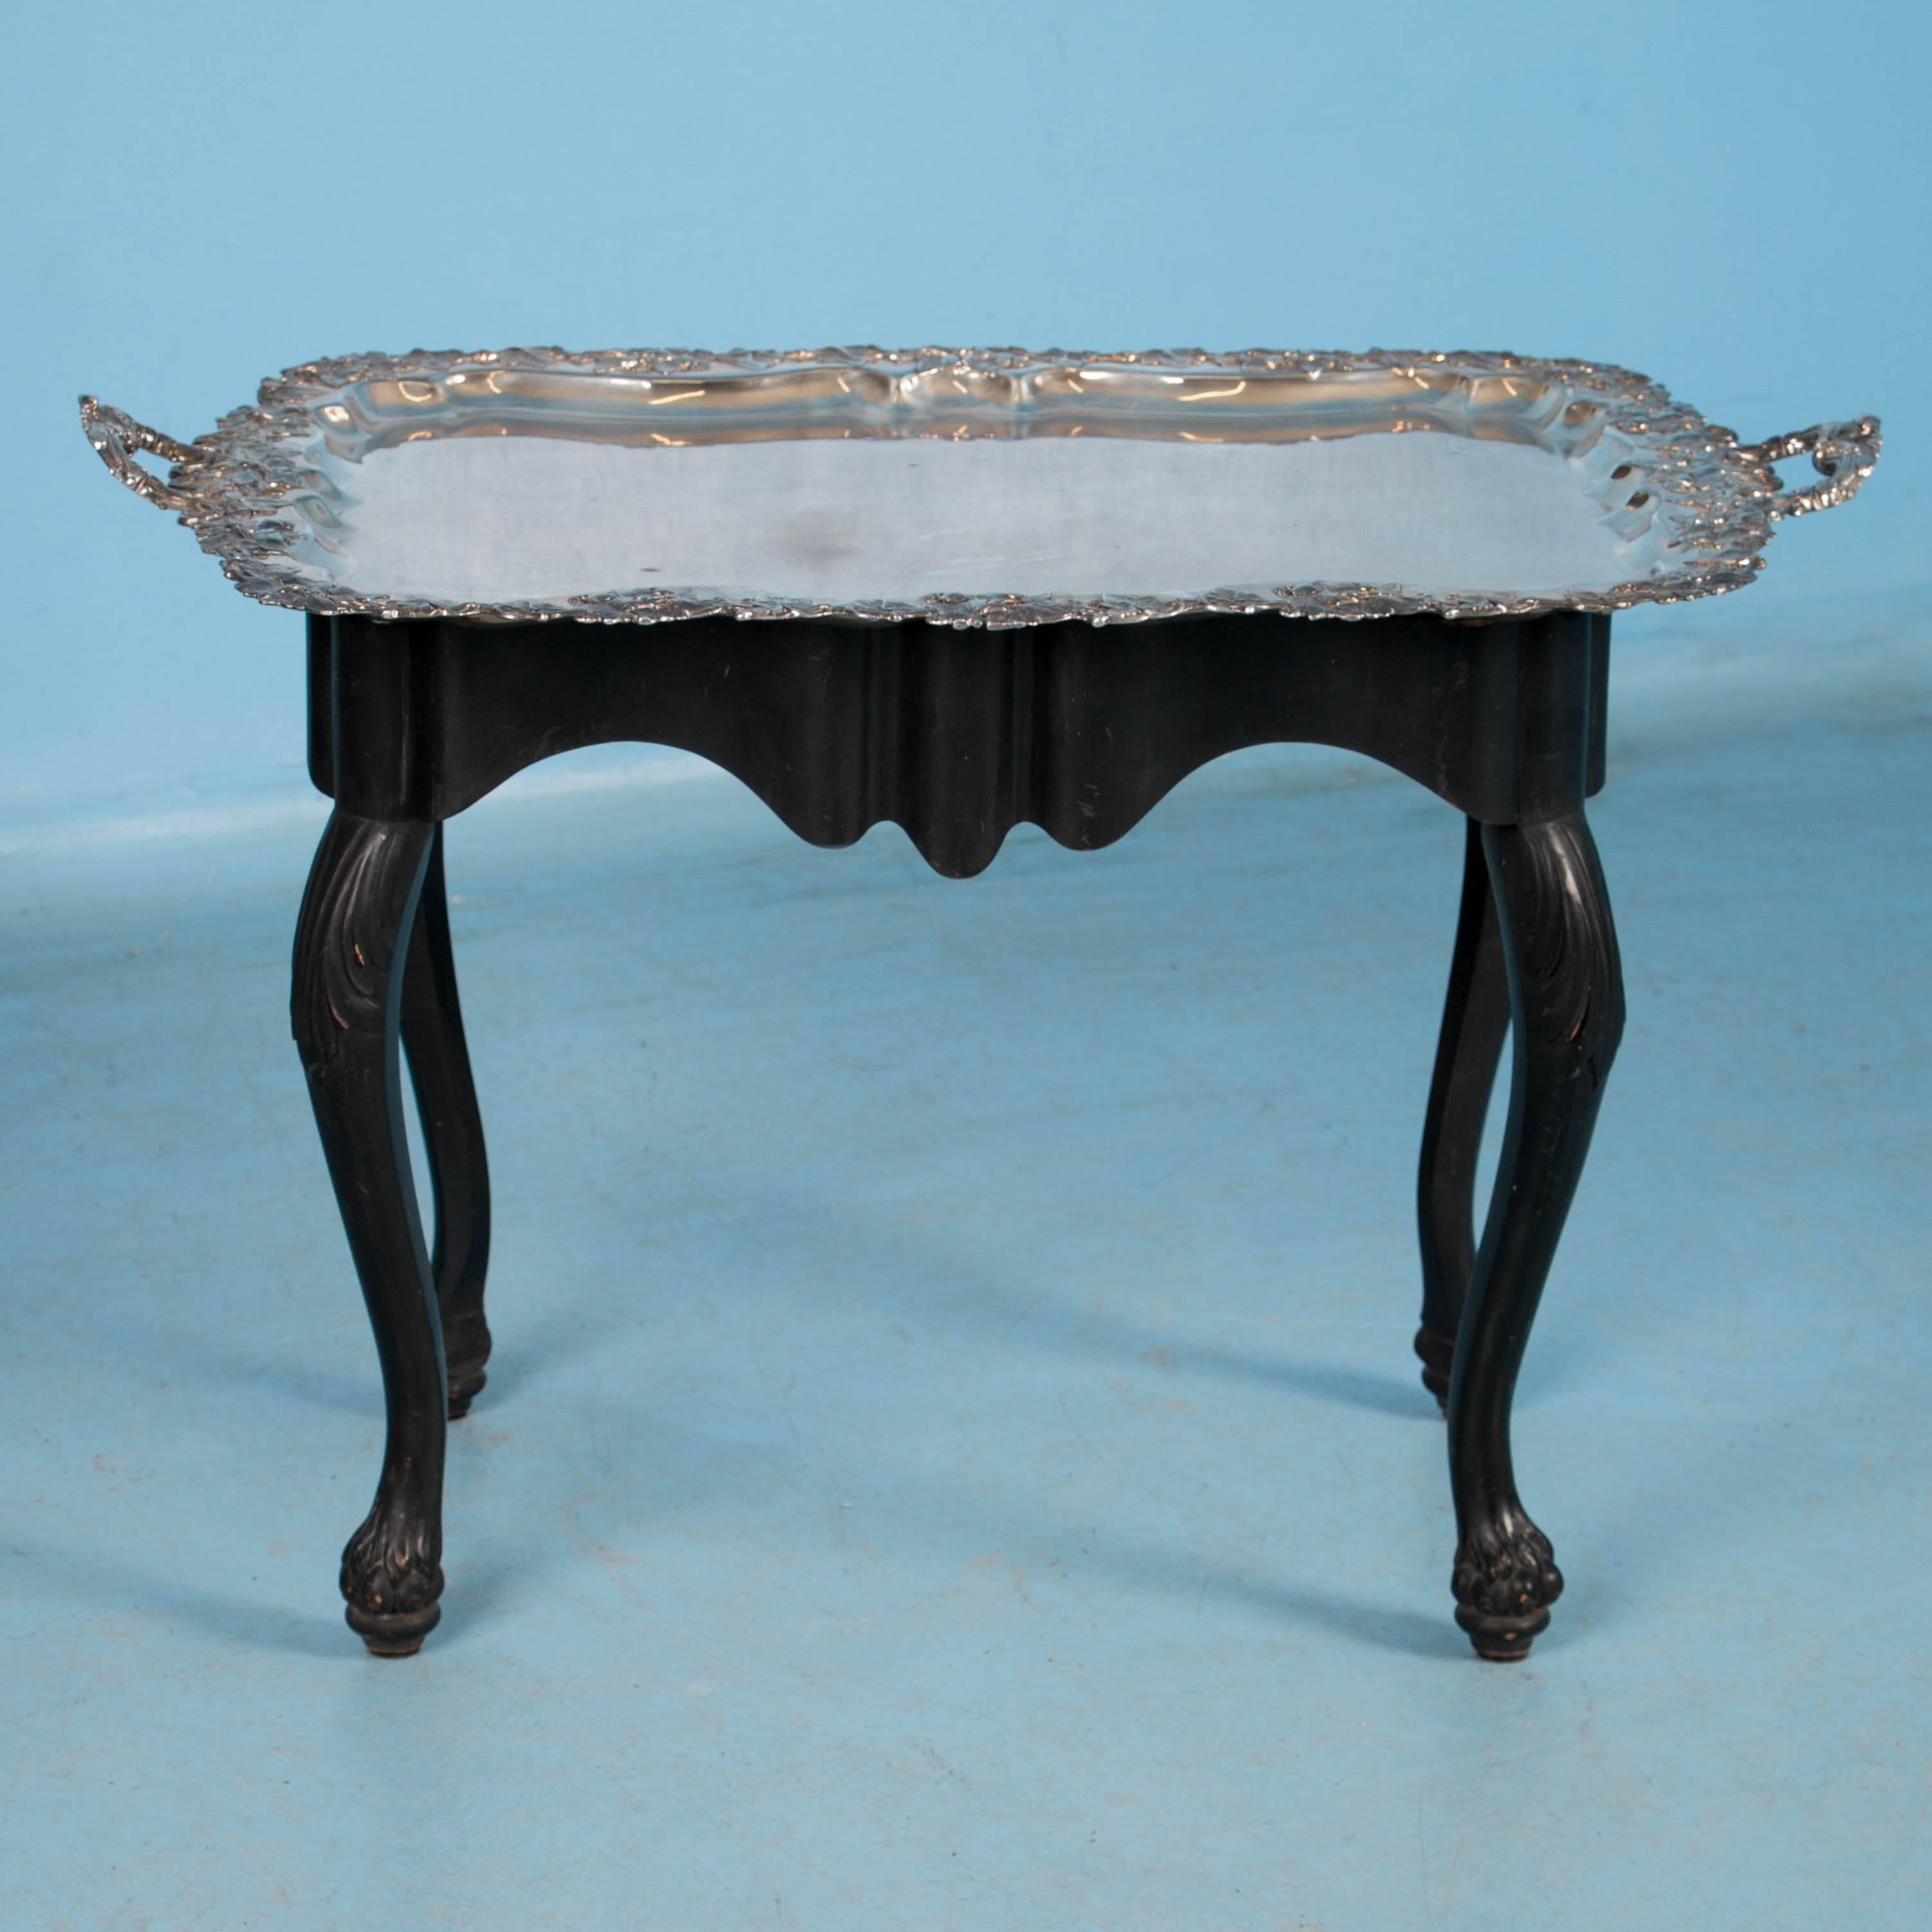 This striking side table serves as the perfect tea service table as well. The ornate silver plated tray has handles, allowing one to lift the substantial tray for serving while it also rests in place well serving as the tabletop. The cabriolet legs